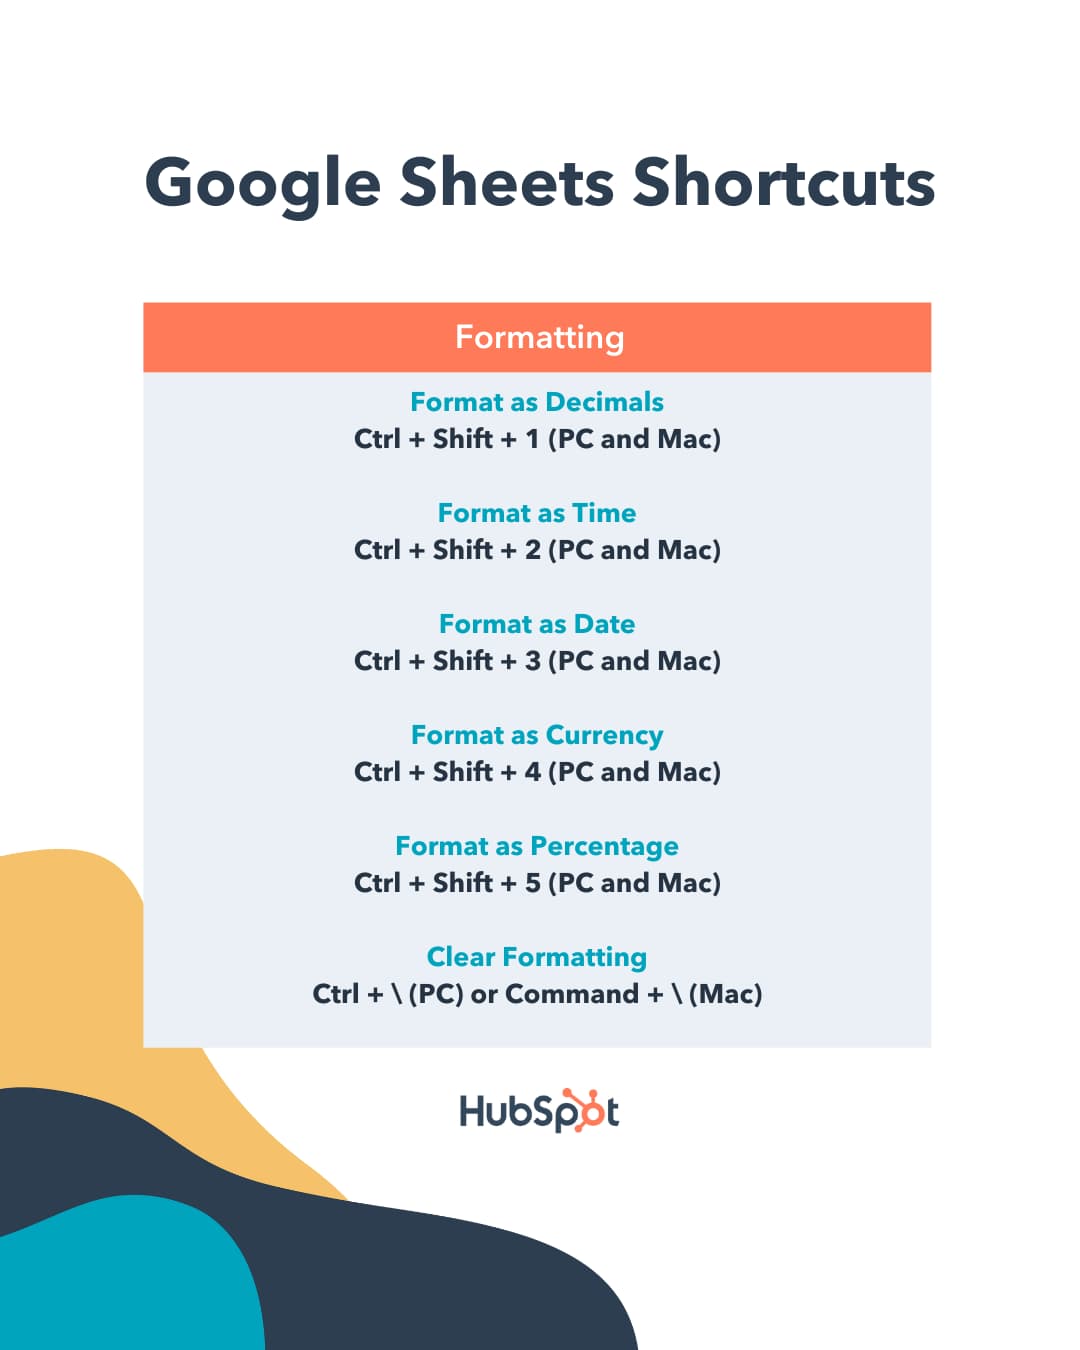 Use Google Sheets shortcuts to format decimals, time, date, currency, percent or clear formatting 